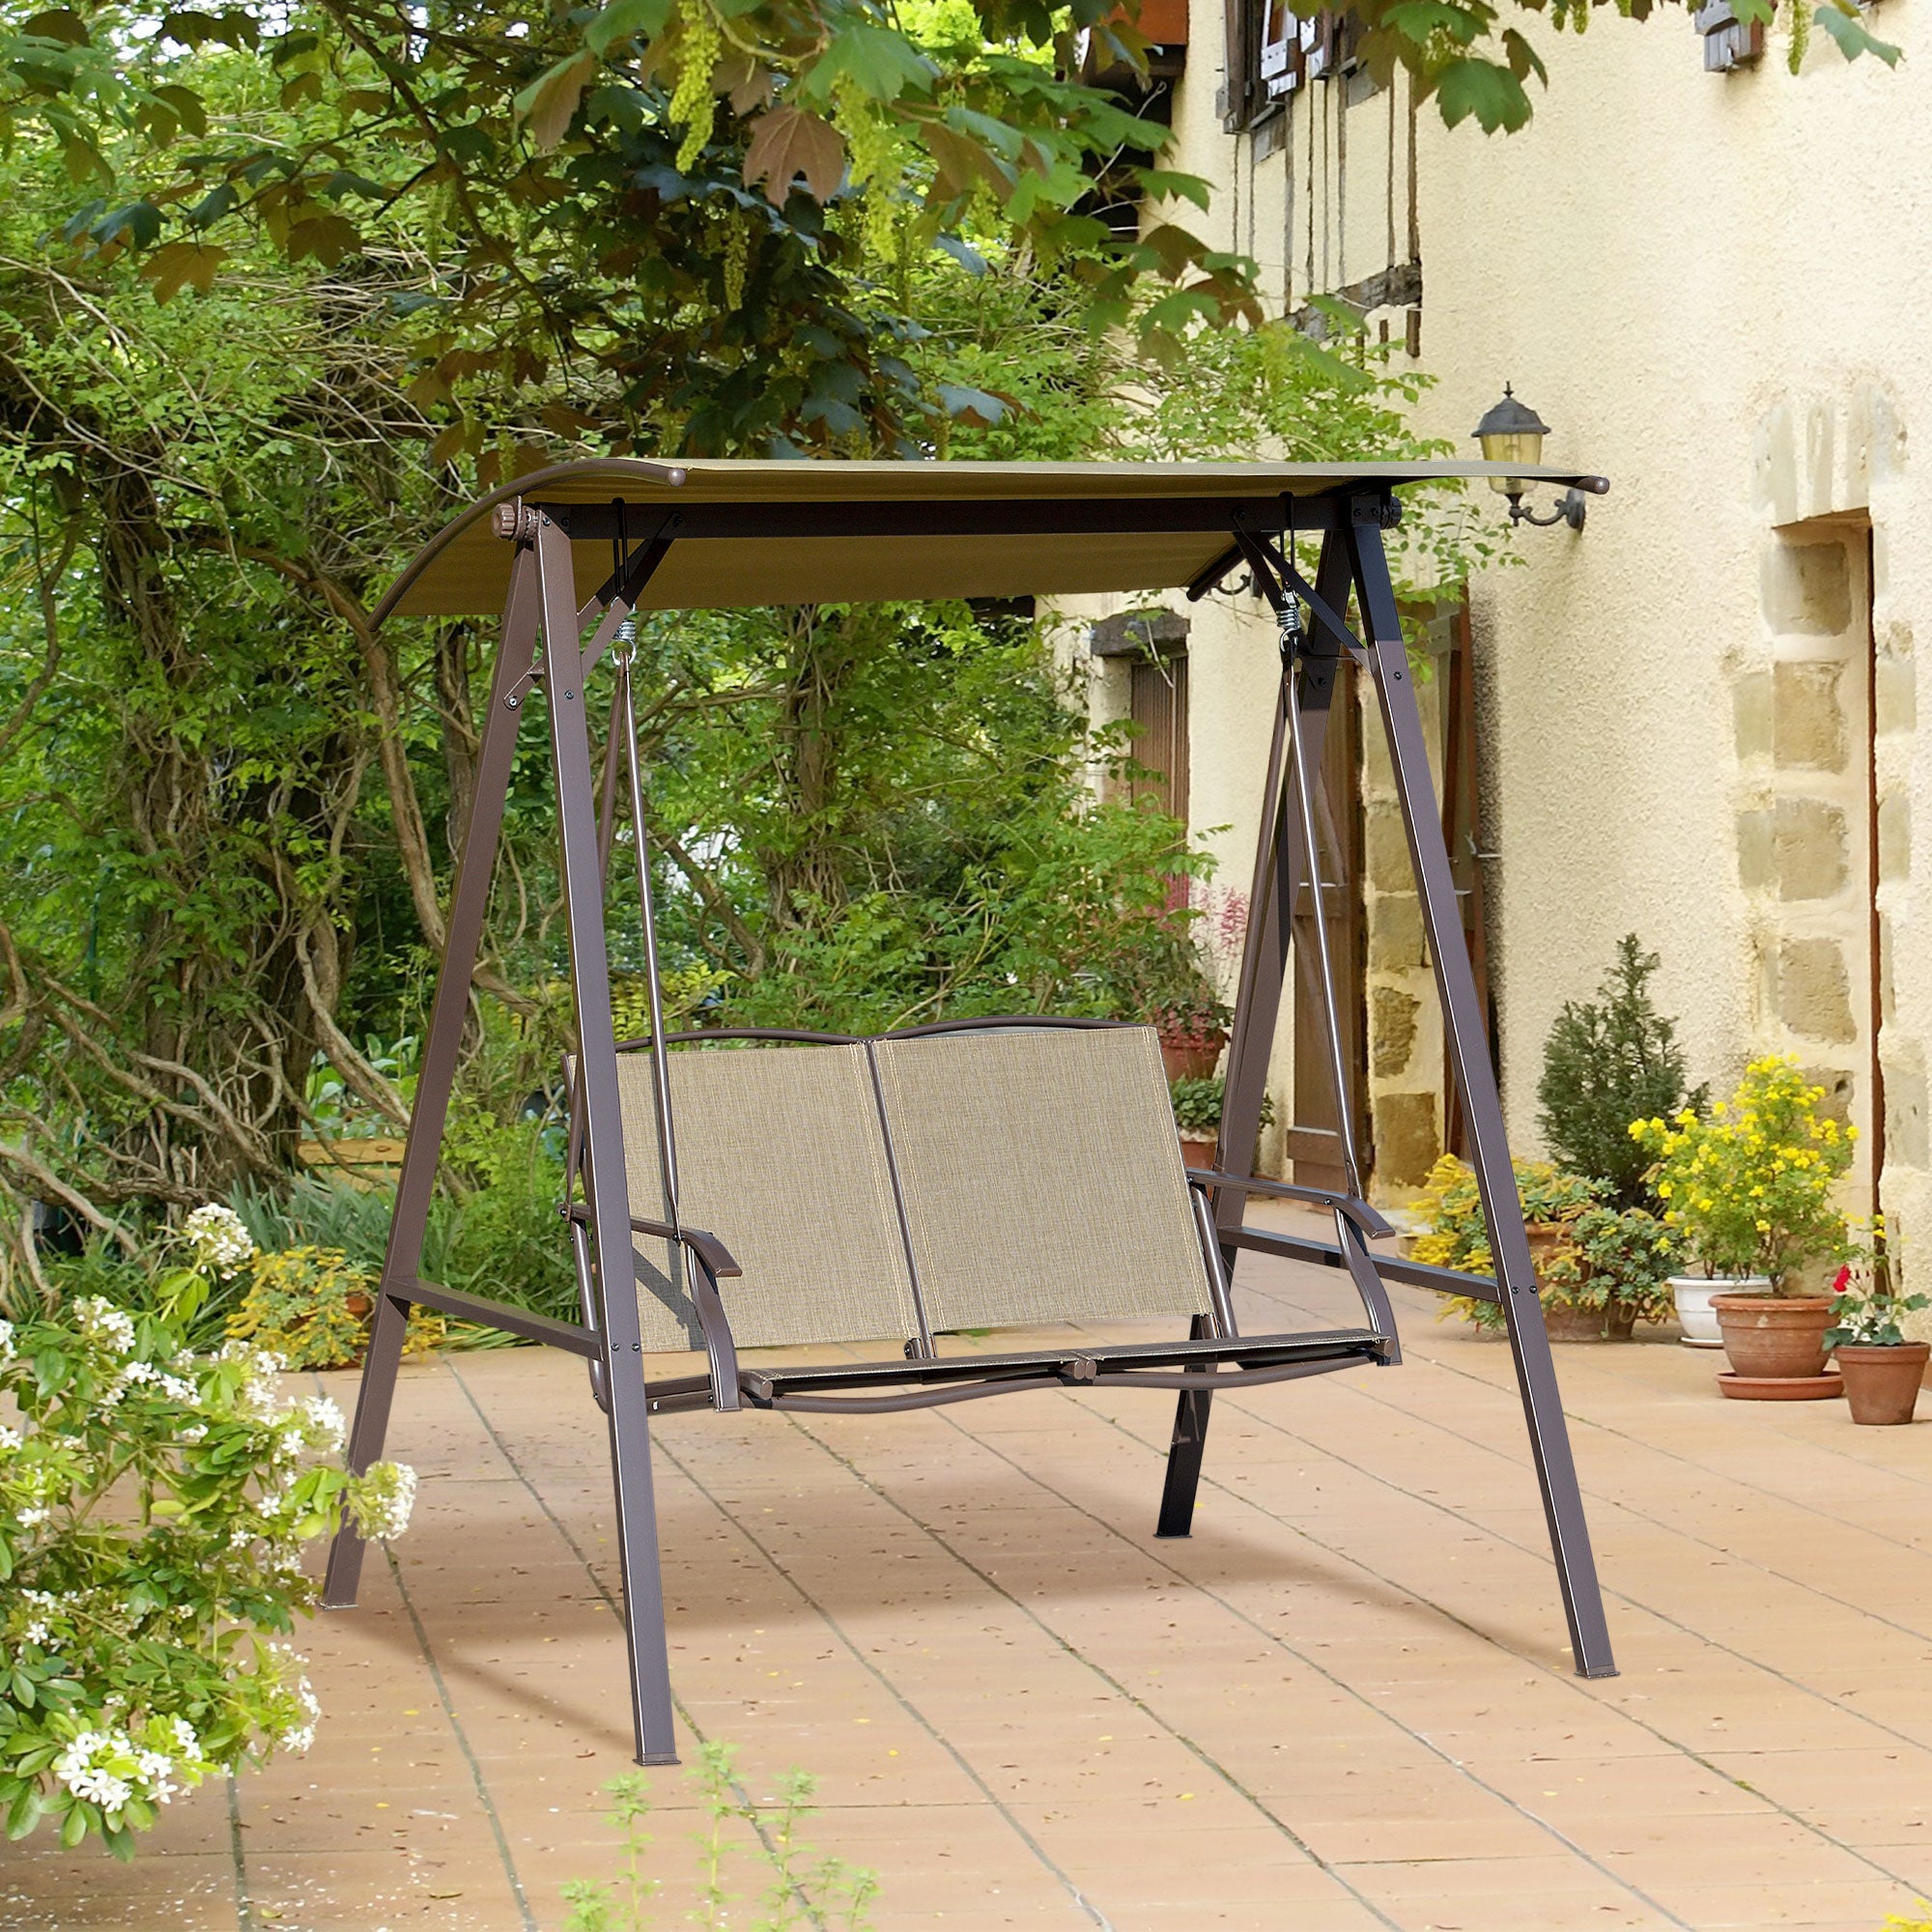 Outsunny 2 Seater Garden Swing Chair Outdoor Canopy Swing Bench with Adjustable Shade and Metal Frame Brown